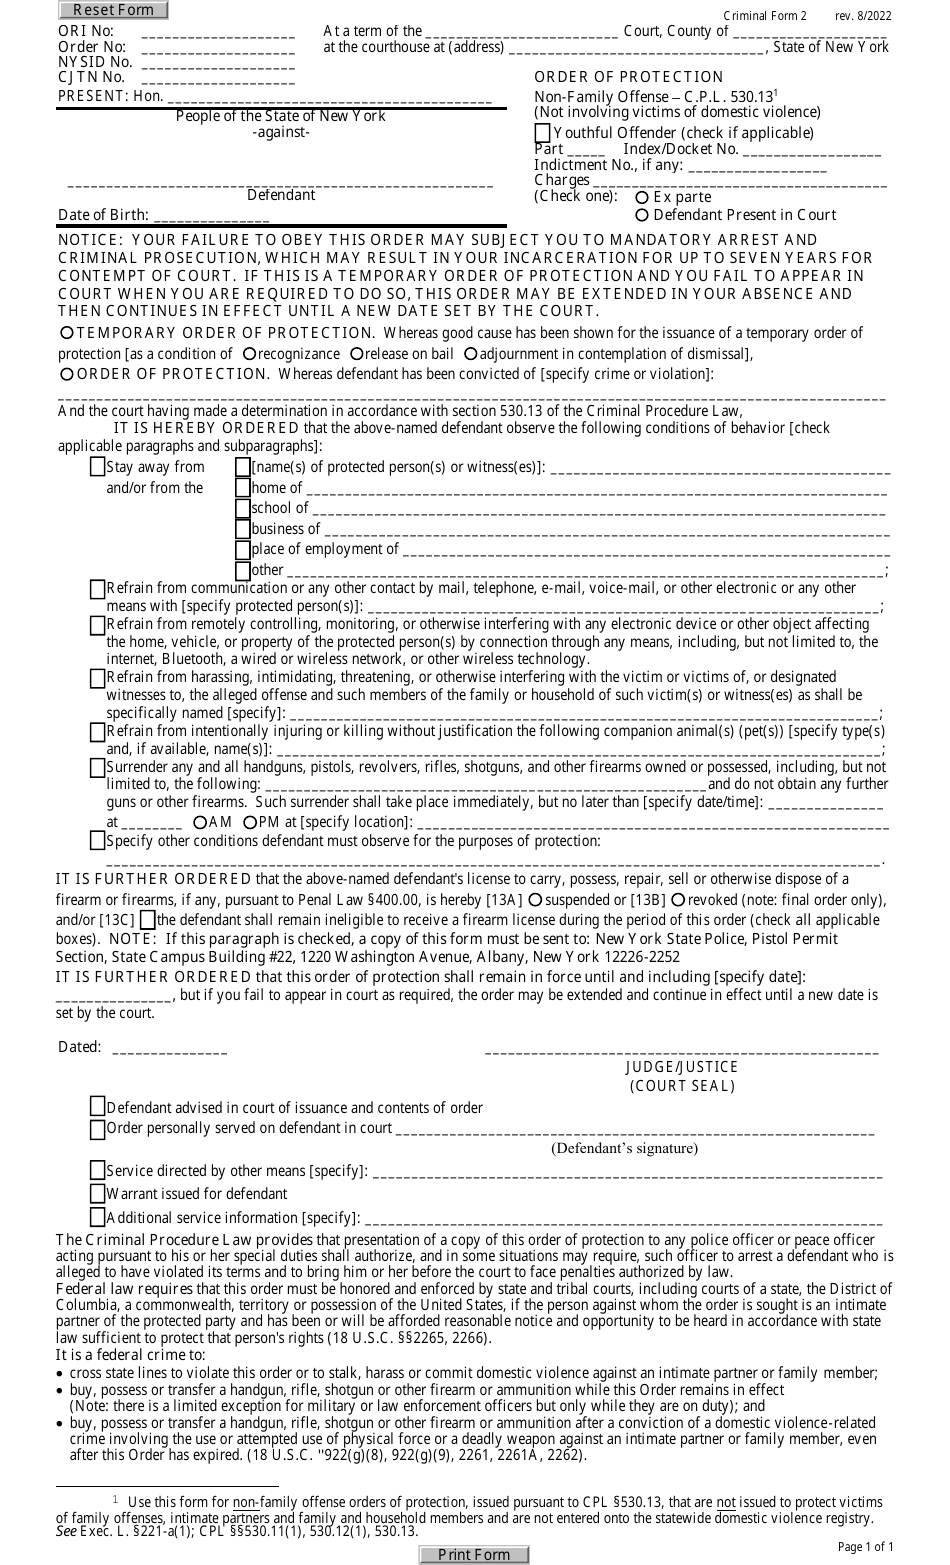 Criminal Form 2 Order of Protection - Non-family Offense (Not Involving Victims of Domestic Violence) - New York, Page 1